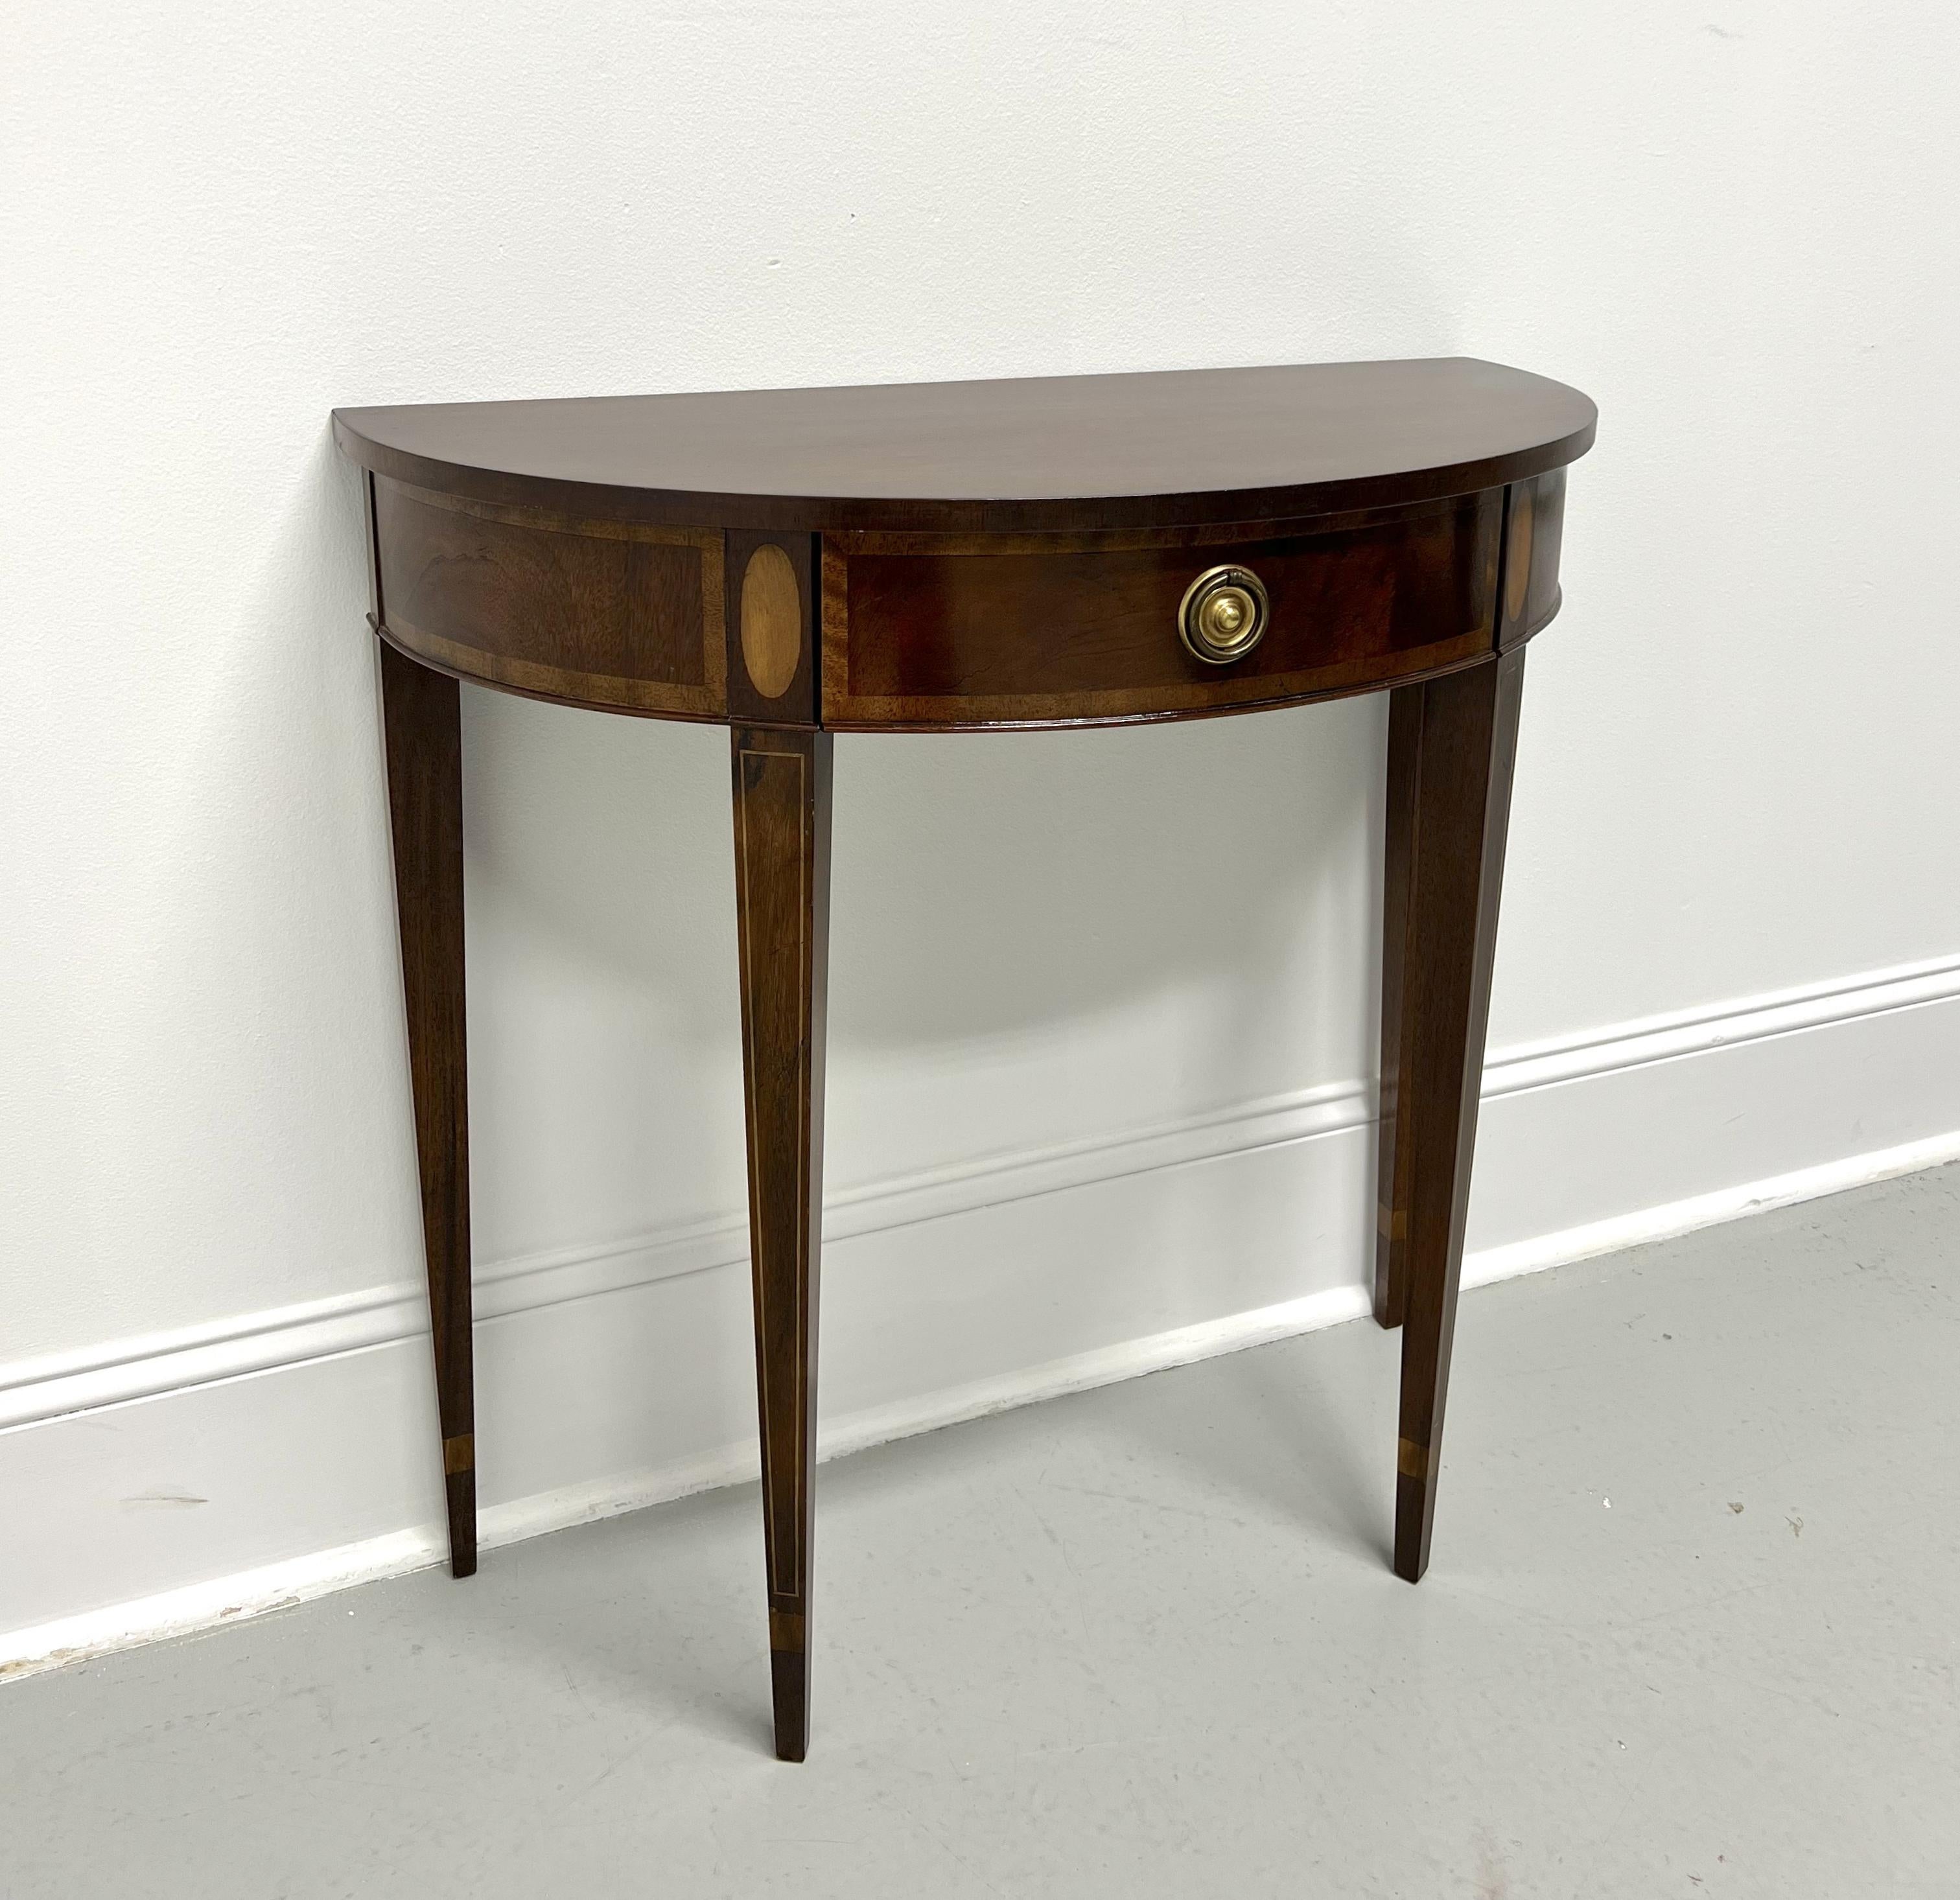 A Hepplewhite style demilune console table by Baker Furniture. Mahogany with brass hardware, banded & inlaid apron, banded drawer front, and tapered straight legs with string inlays. Features one drawer of dovetail construction. Made in the USA, in